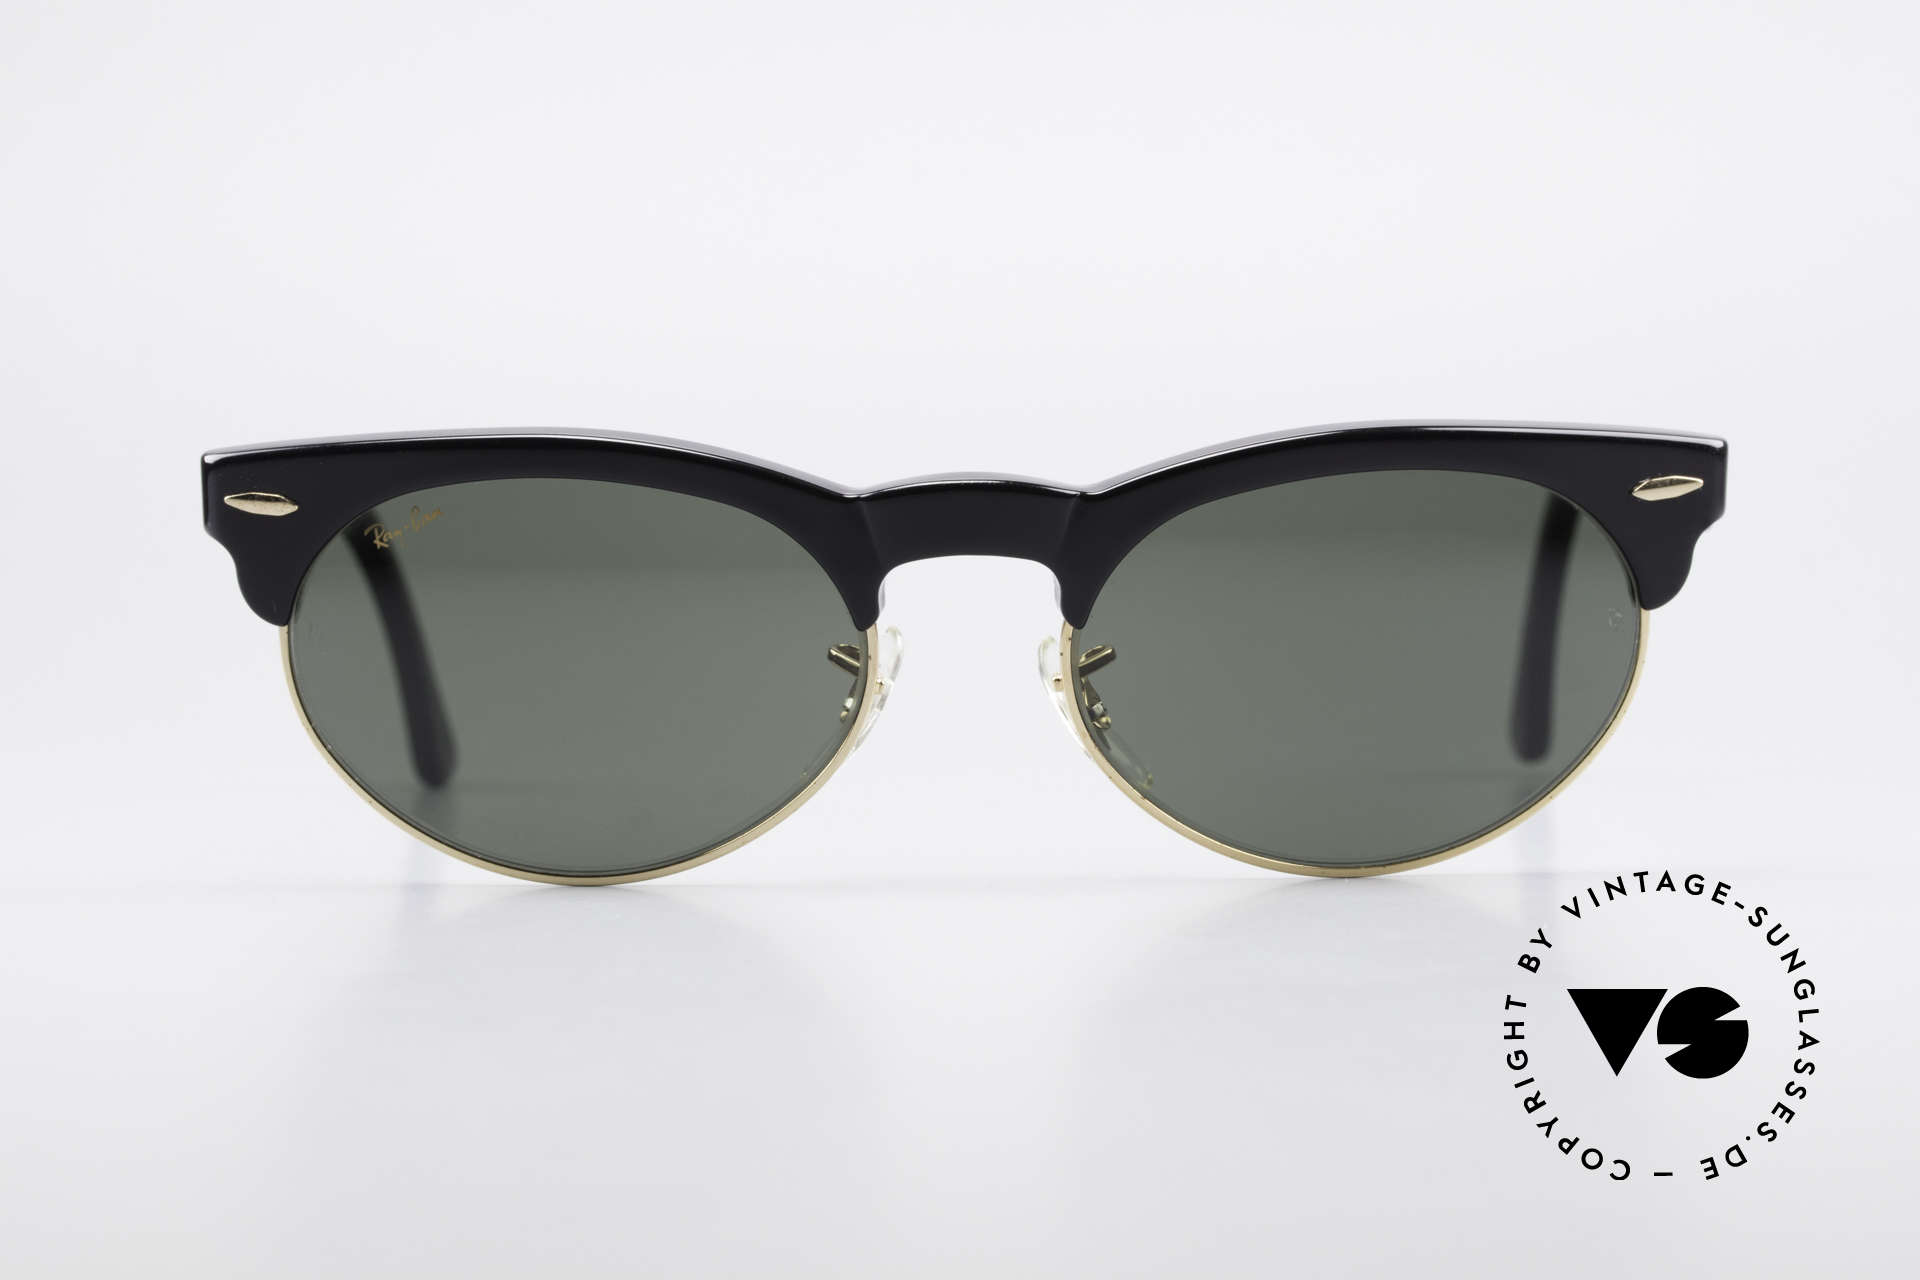 bausch and lomb ray ban sunglasses